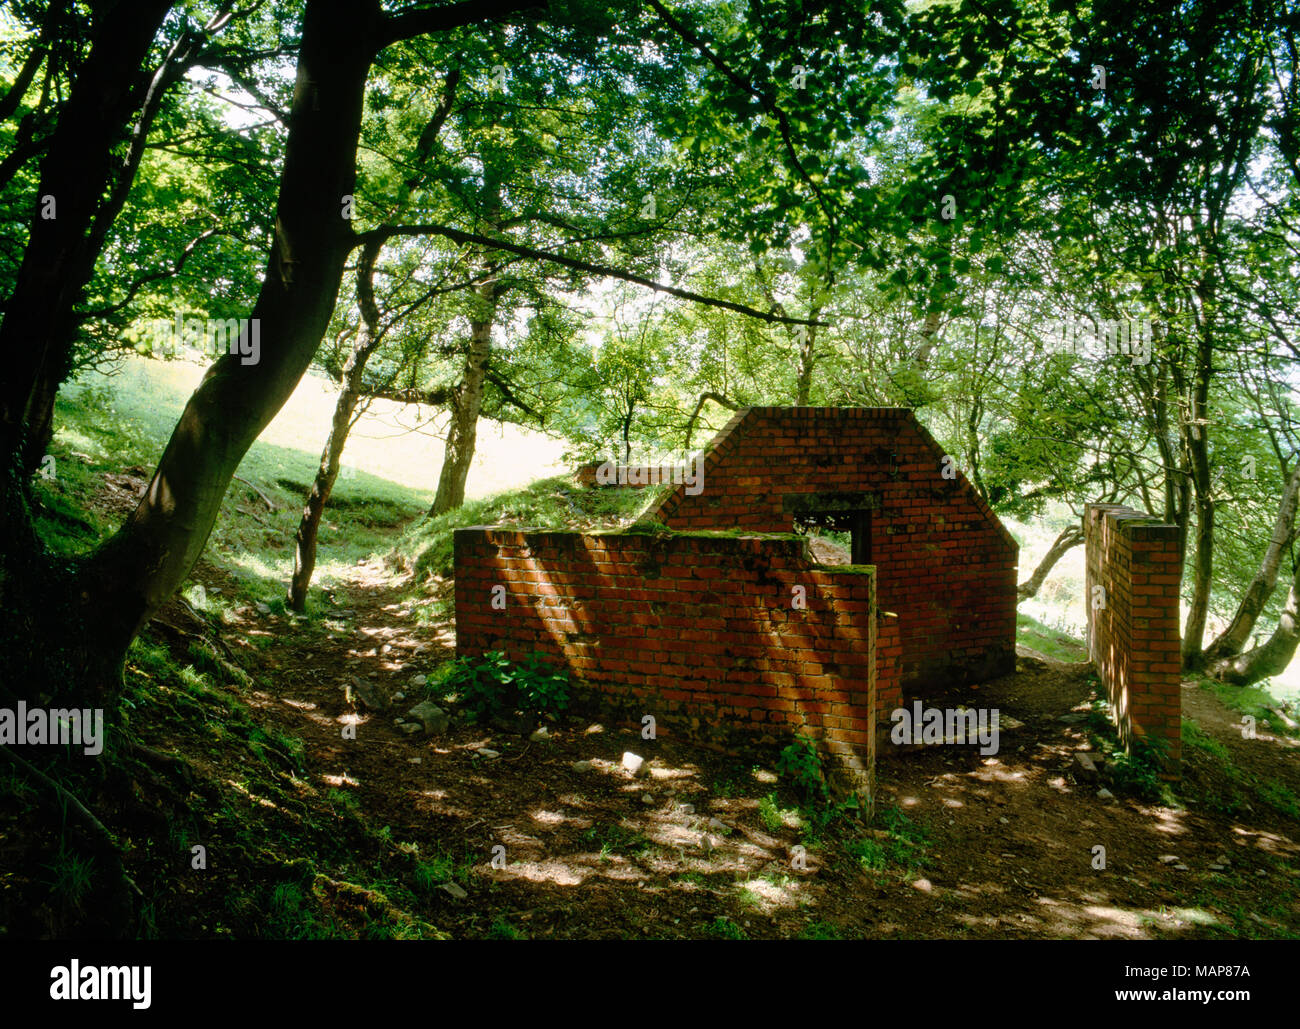 WWII air-raid shelter & decoy control centre used to ignite controlled fires on Ffrith Mountain, Flintshire, UK, designed to deceive German bombers. Stock Photo